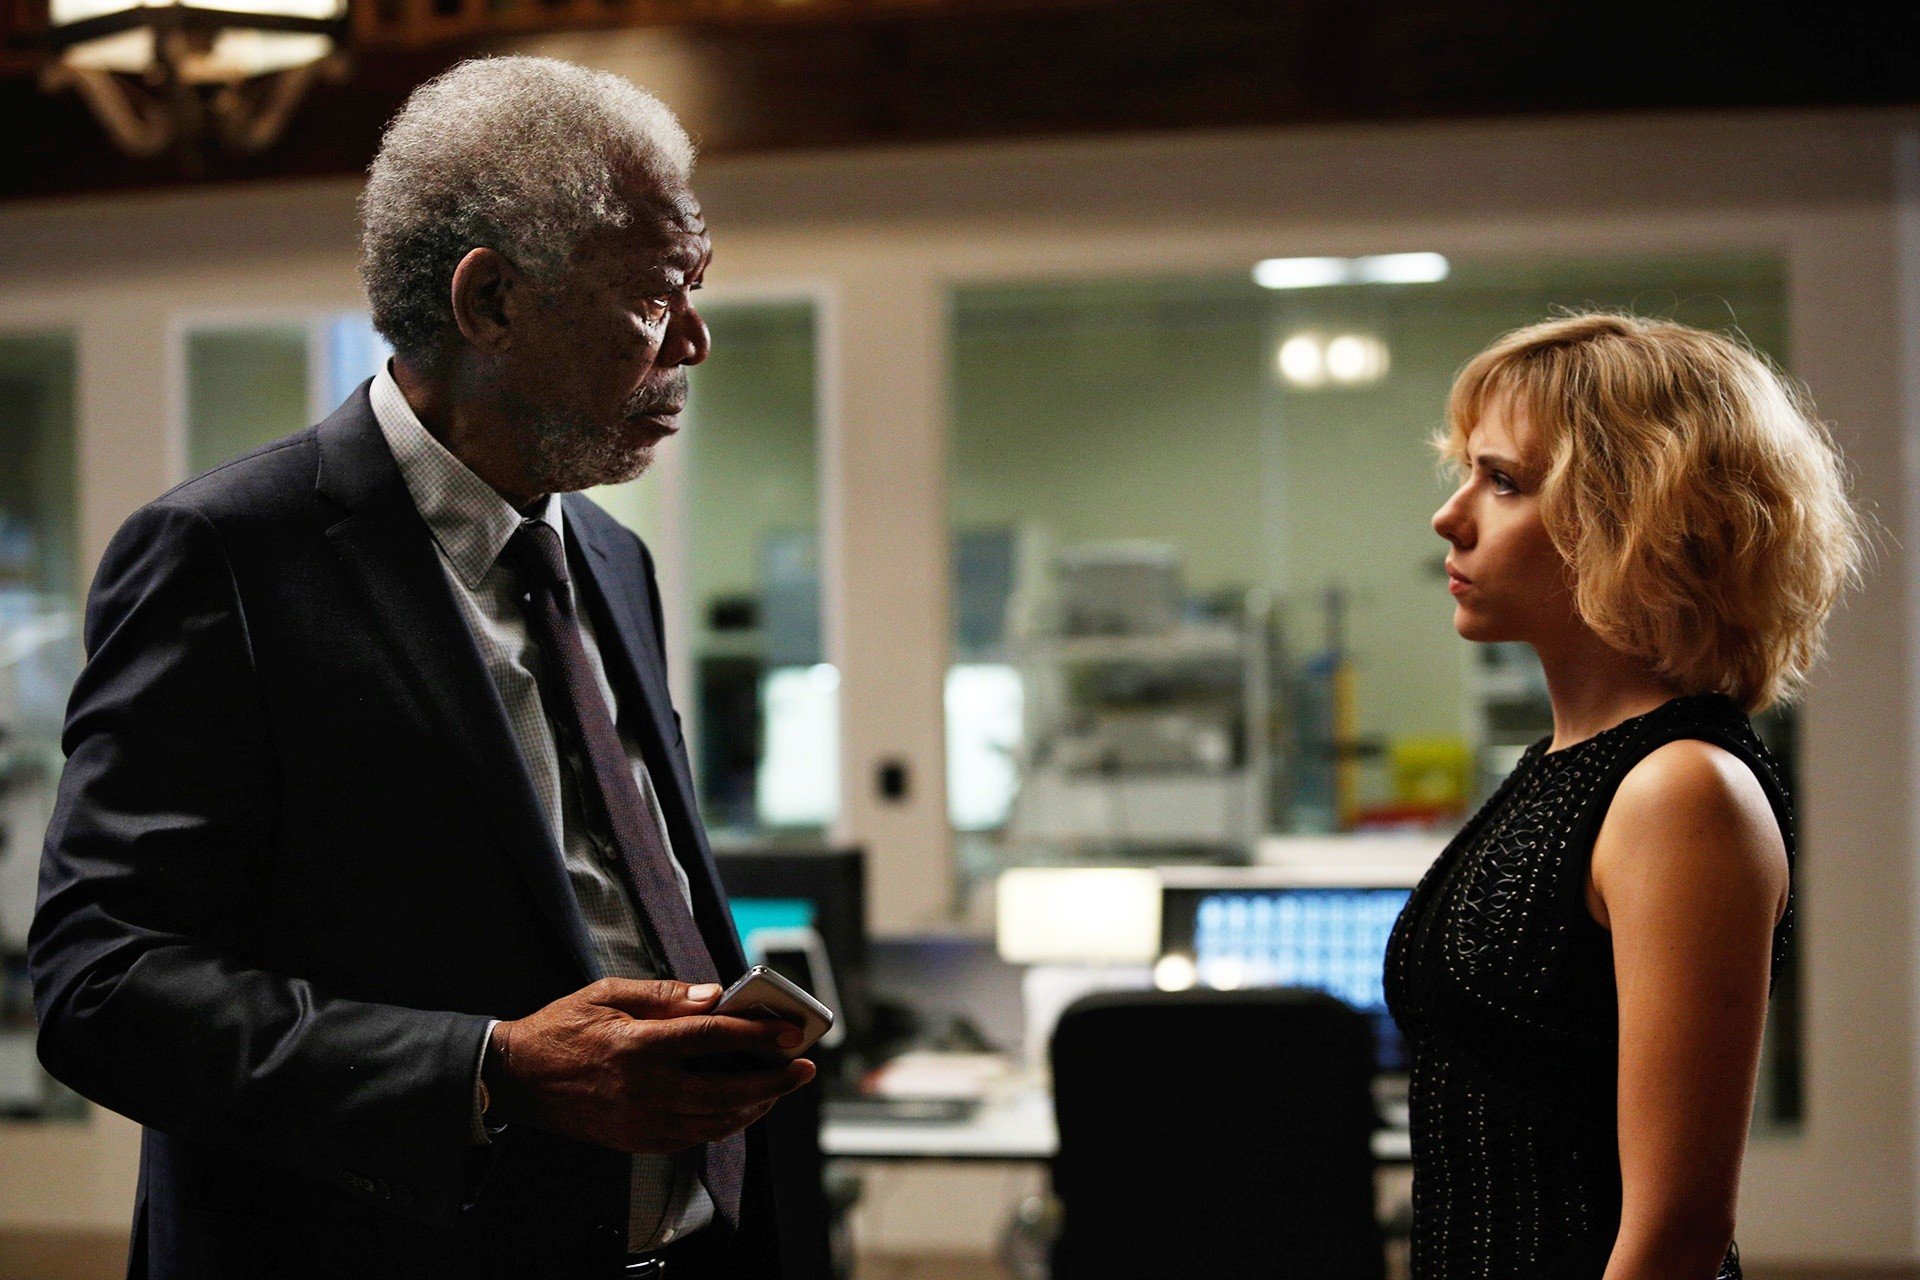 Morgan Freeman and Scarlett Johansson (Lucy) in Universal Pictures' Lucy (2014)